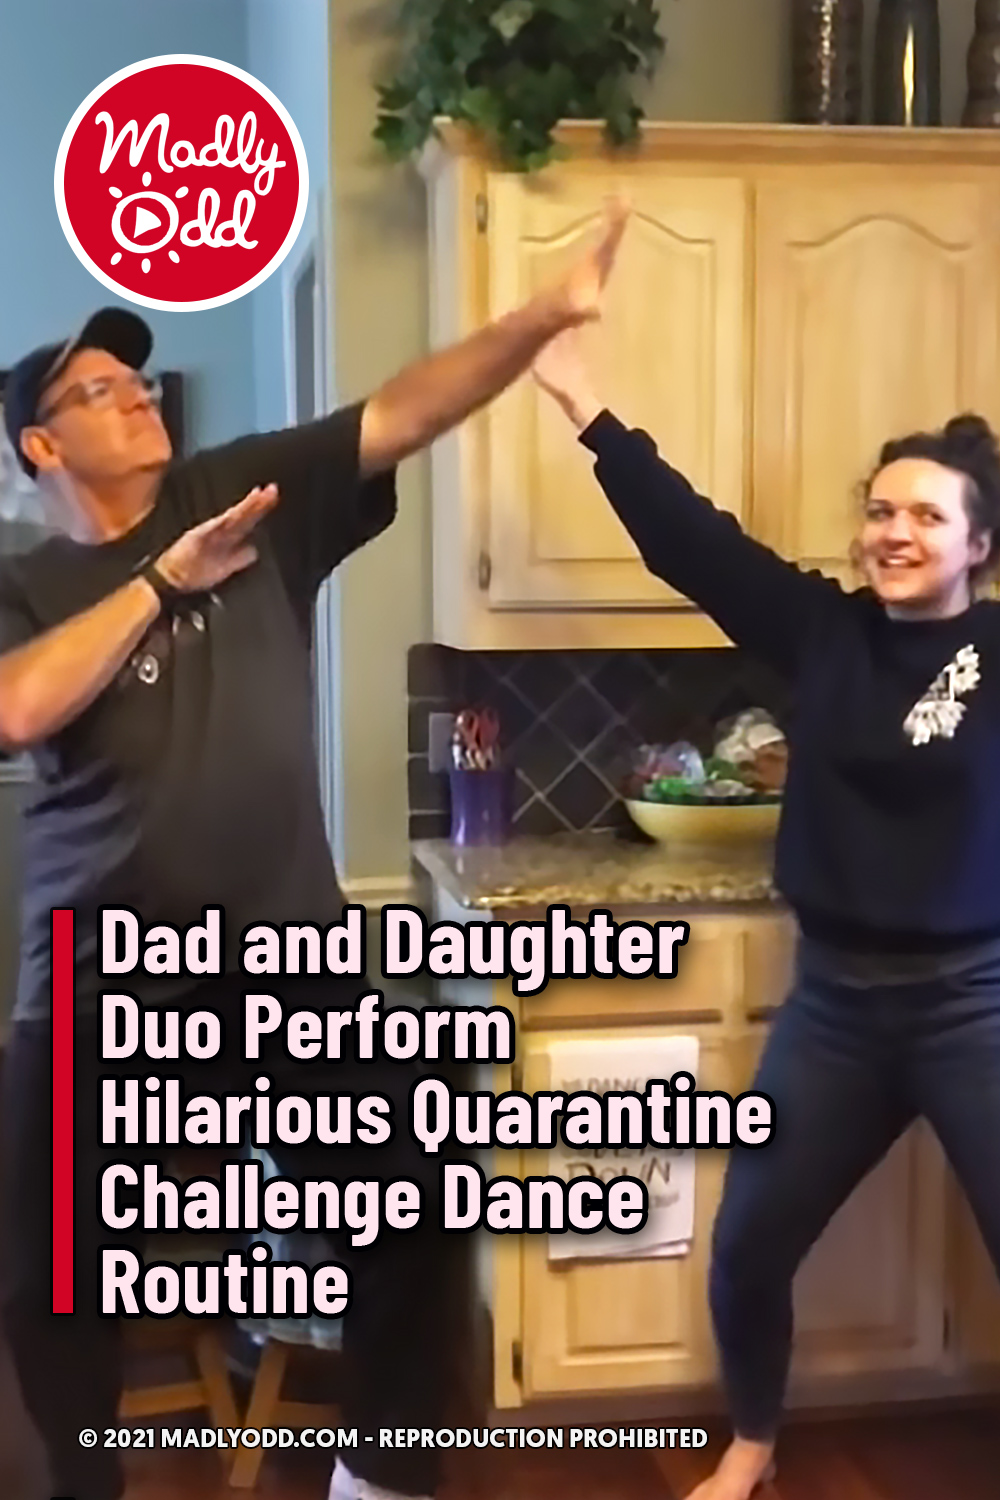 Dad and Daughter Duo Perform Hilarious Quarantine Challenge Dance Routine